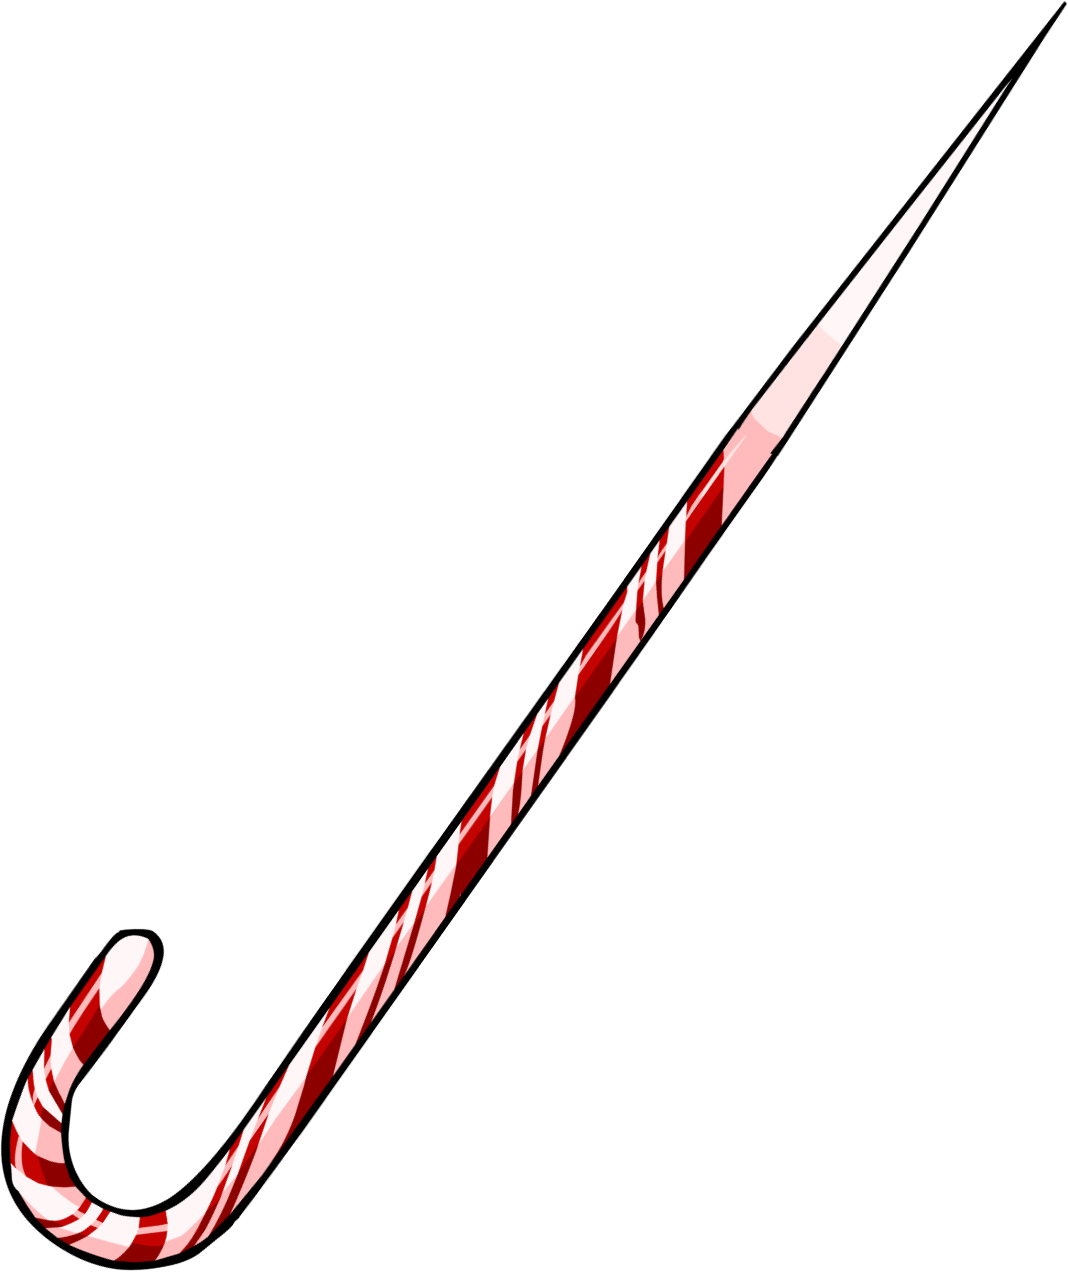 Spear_Candy Cane_Classic Colors_1_1068x1280.png